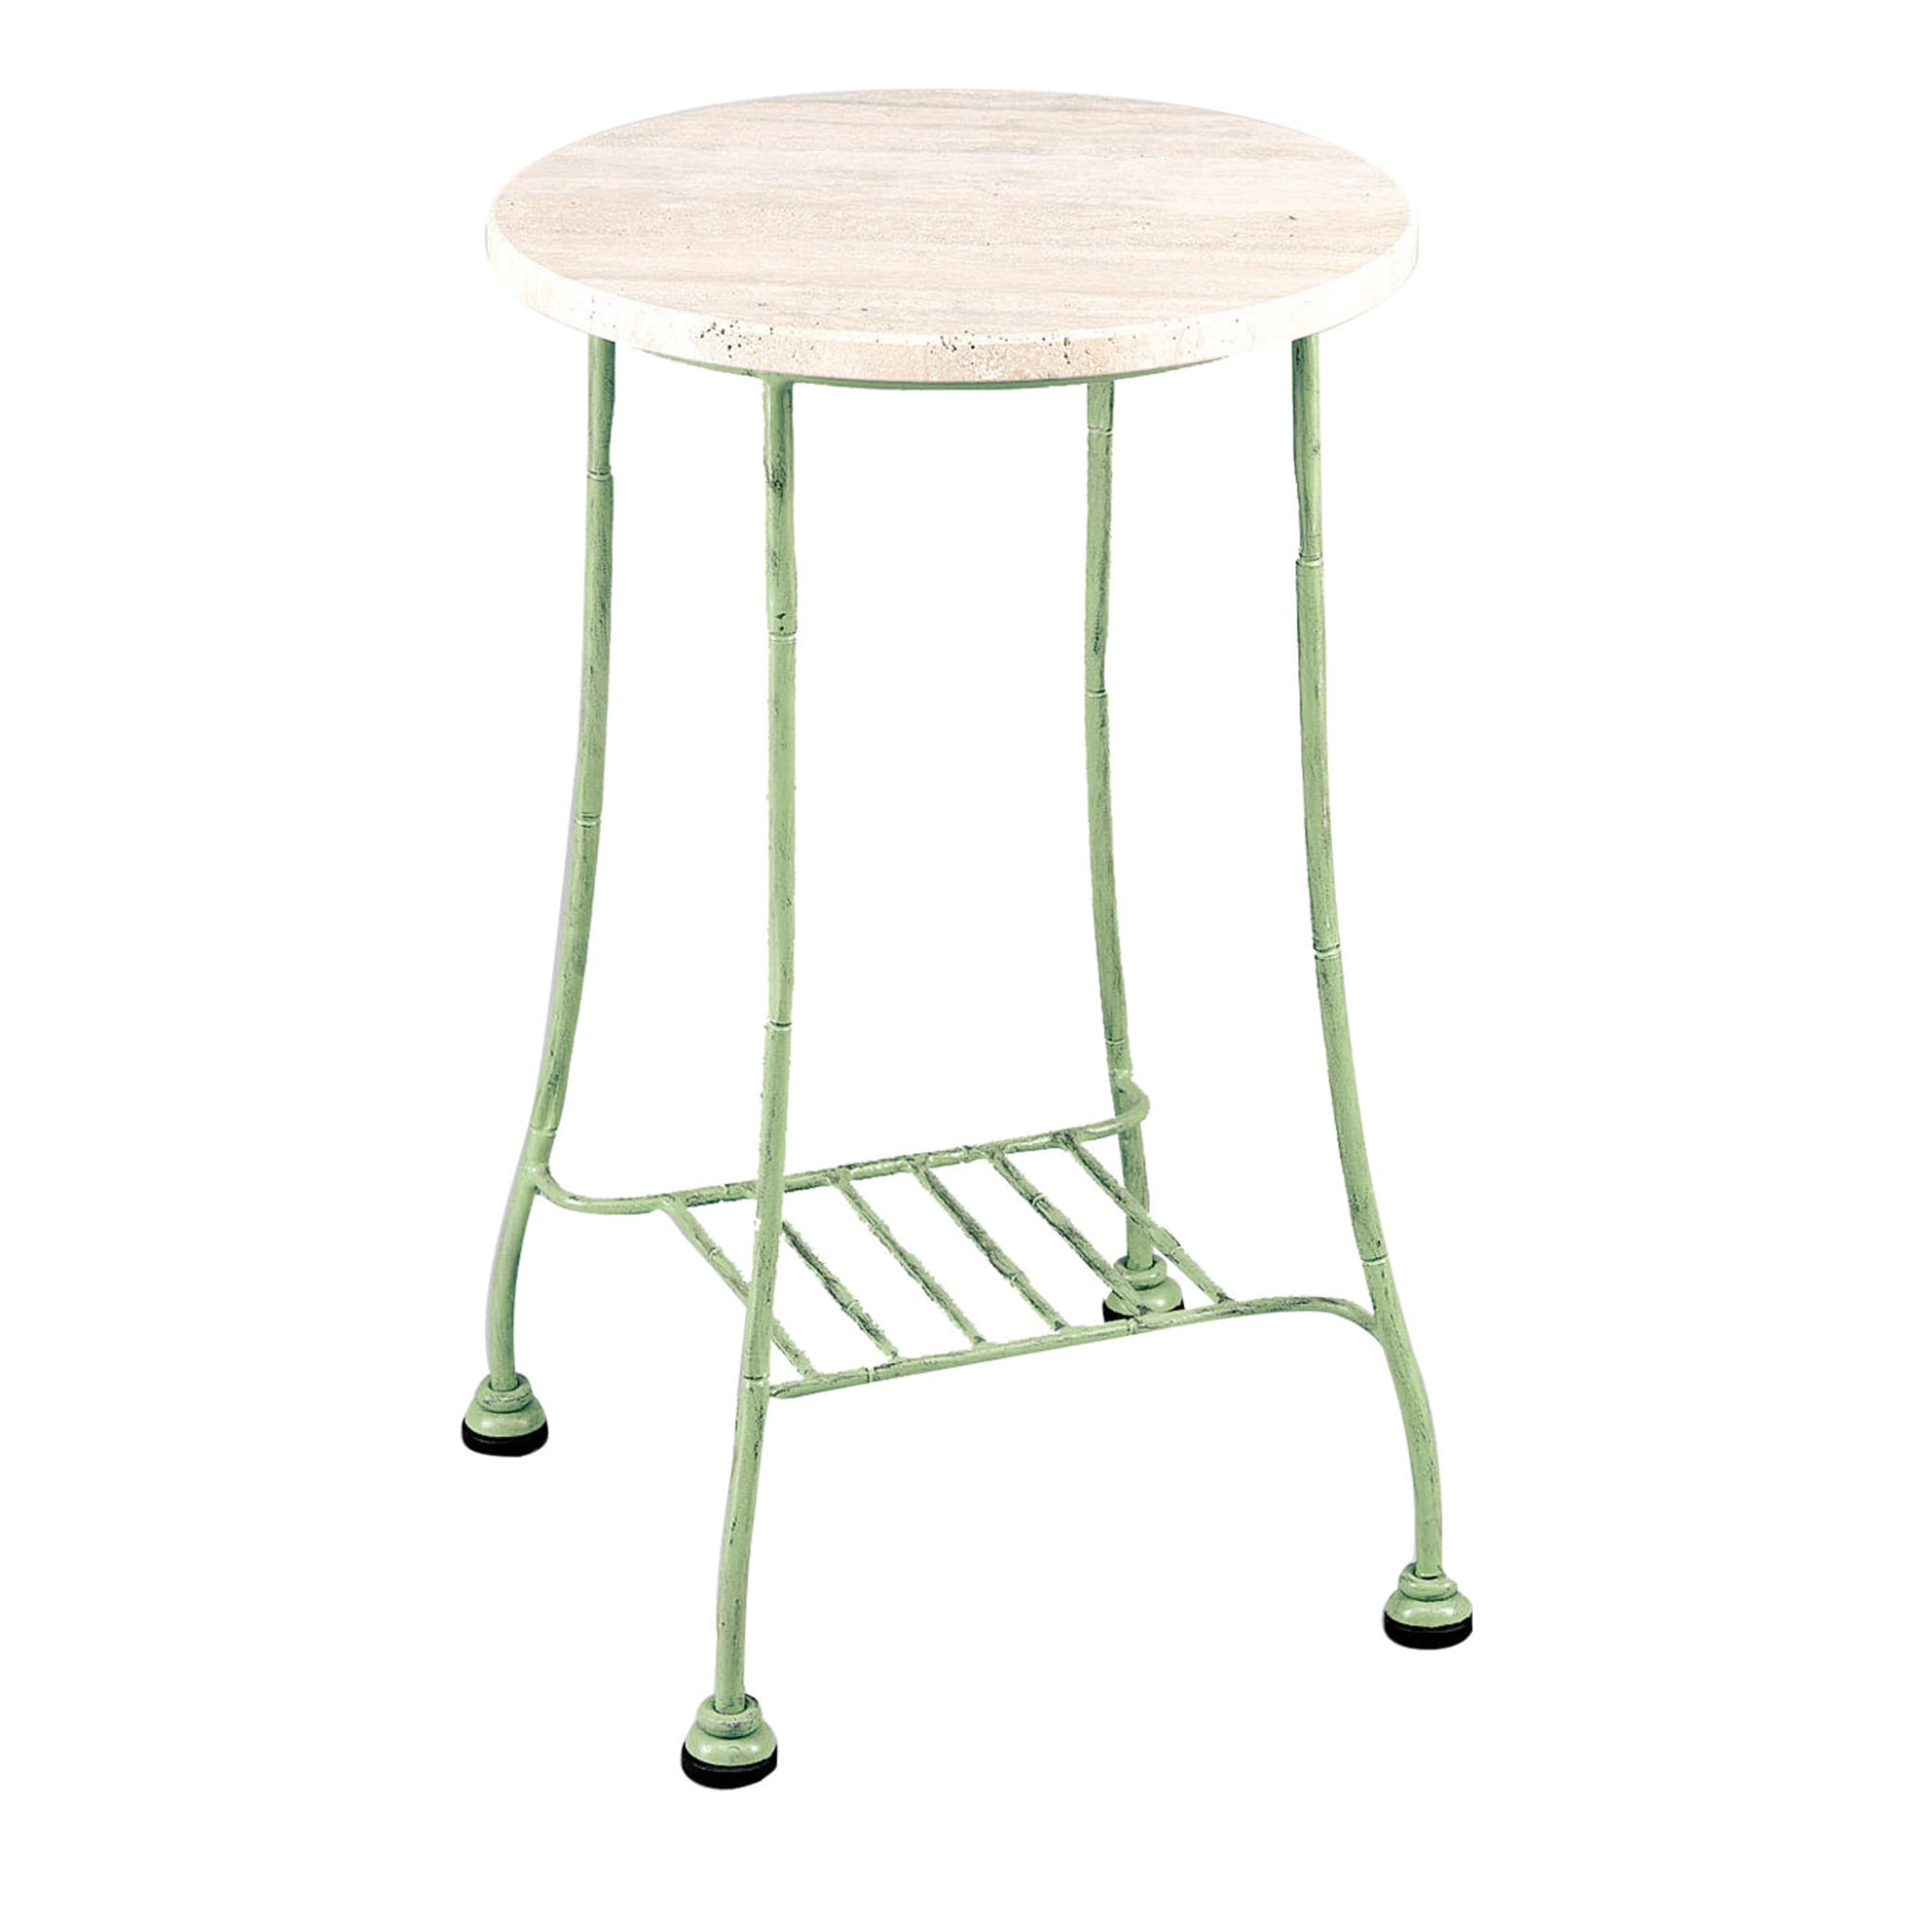 Bamboo Outdoor Green Stainless Steel High Side Table - Main view